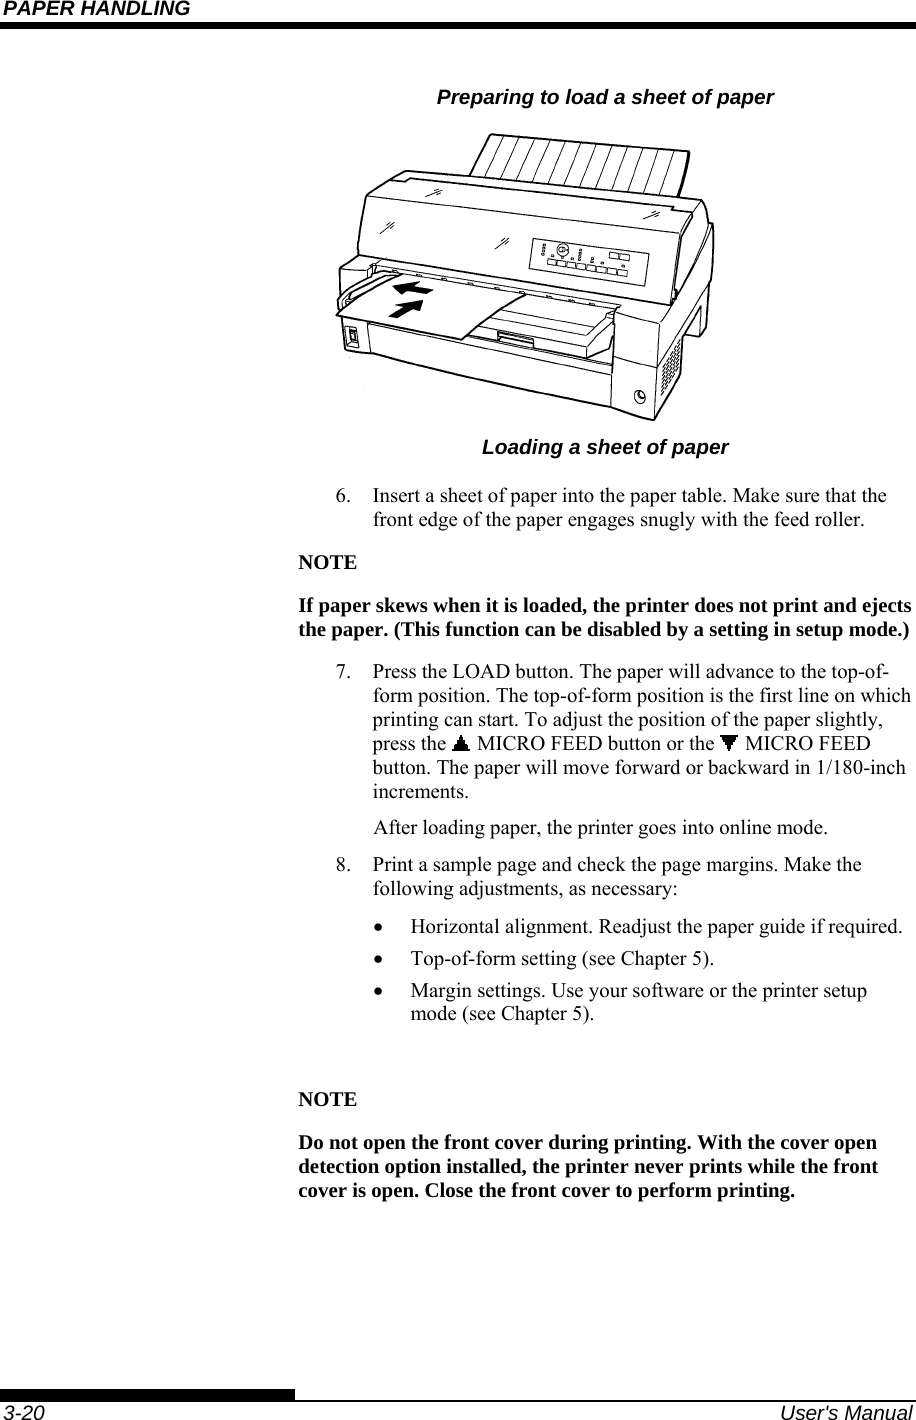 PAPER HANDLING    3-20  User&apos;s Manual Preparing to load a sheet of paper  Loading a sheet of paper 6.  Insert a sheet of paper into the paper table. Make sure that the front edge of the paper engages snugly with the feed roller. NOTE If paper skews when it is loaded, the printer does not print and ejects the paper. (This function can be disabled by a setting in setup mode.) 7.  Press the LOAD button. The paper will advance to the top-of-form position. The top-of-form position is the first line on which printing can start. To adjust the position of the paper slightly, press the   MICRO FEED button or the   MICRO FEED button. The paper will move forward or backward in 1/180-inch increments. After loading paper, the printer goes into online mode. 8.  Print a sample page and check the page margins. Make the following adjustments, as necessary: •  Horizontal alignment. Readjust the paper guide if required. •  Top-of-form setting (see Chapter 5). •  Margin settings. Use your software or the printer setup mode (see Chapter 5).  NOTE Do not open the front cover during printing. With the cover open detection option installed, the printer never prints while the front cover is open. Close the front cover to perform printing. 